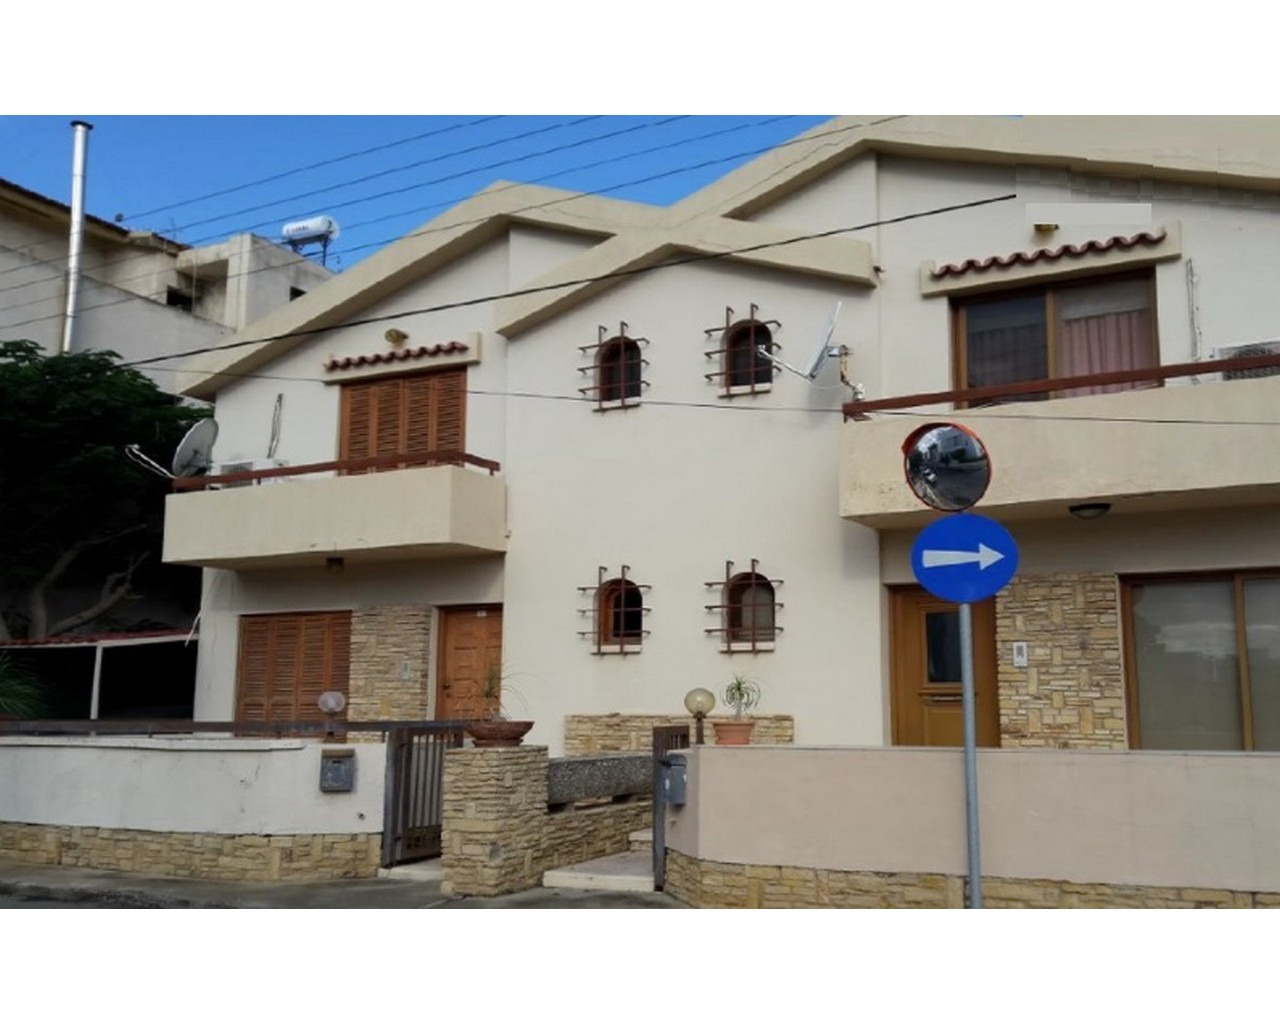 3 Bedroom House for Sale in Limassol – Agia Zoni